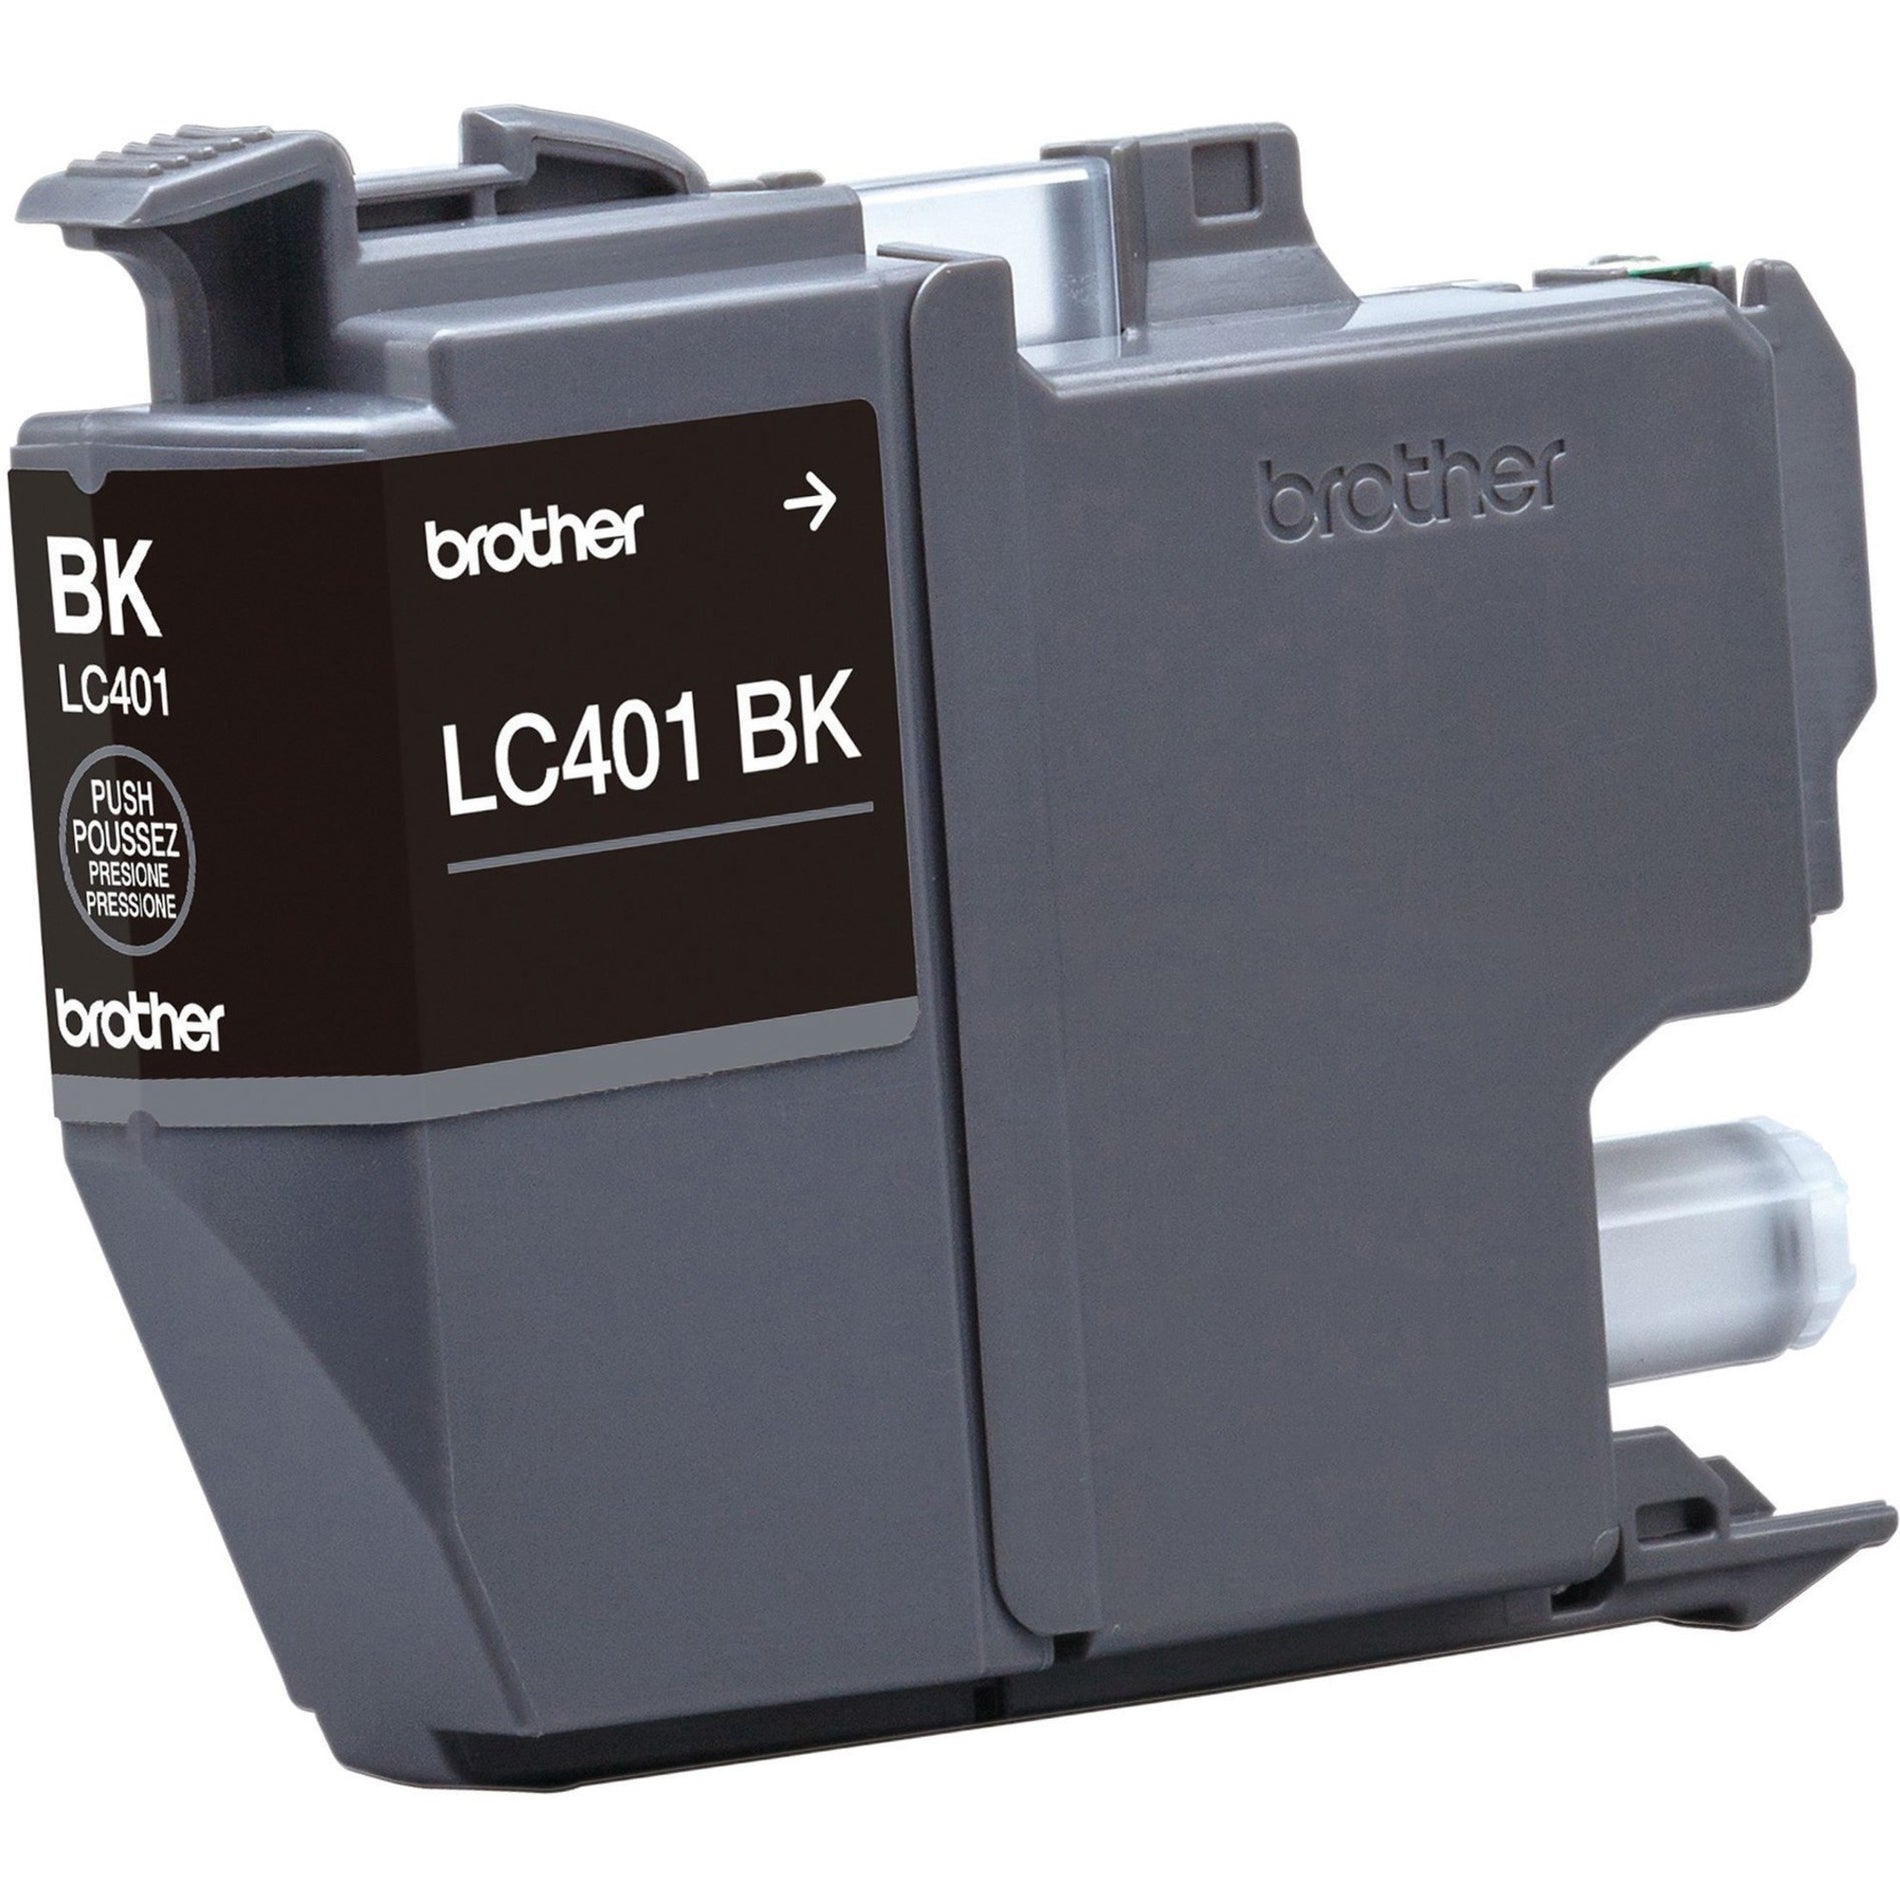 Brother LC401BKS Black Ink Cartridge - Original, Standard Yield, 200 Pages